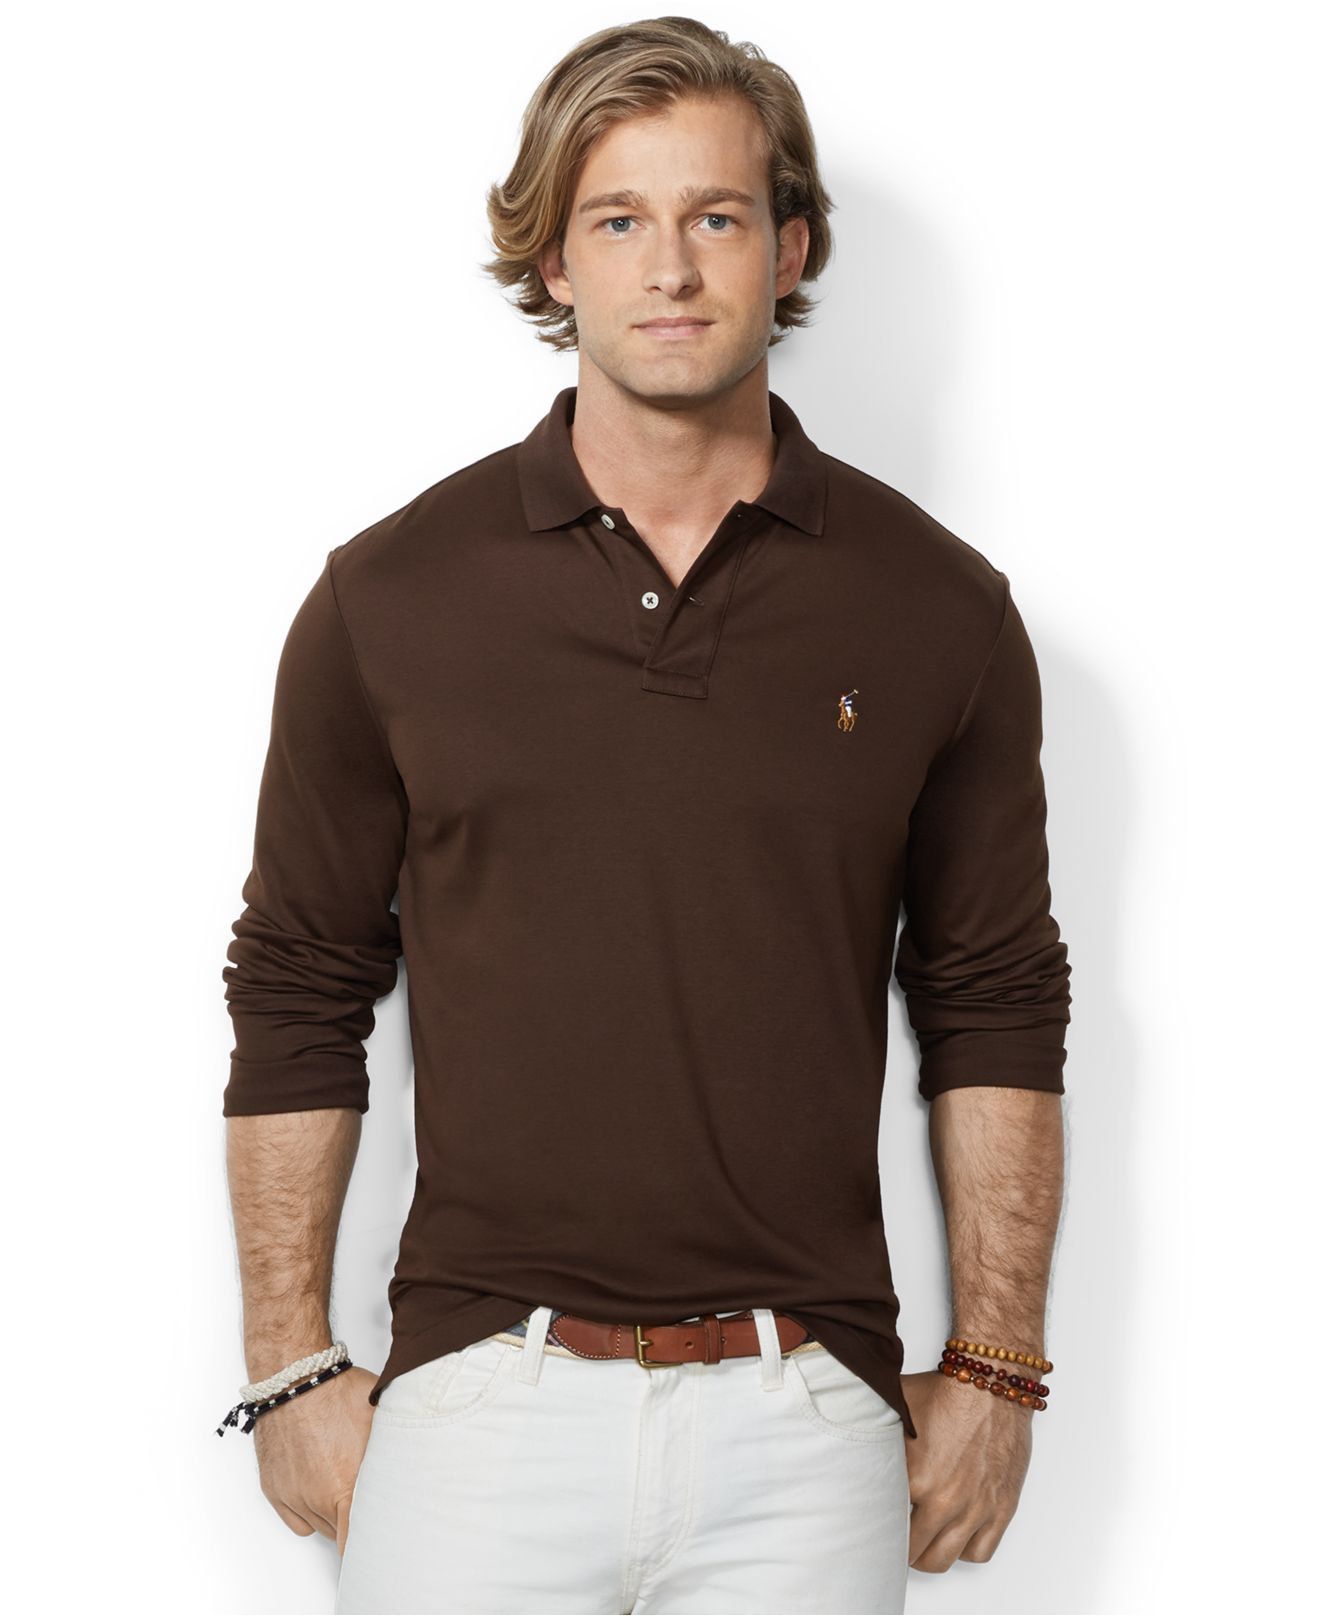 Lyst - Polo Ralph Lauren Soft-Touch Pima Polo in Brown for Men